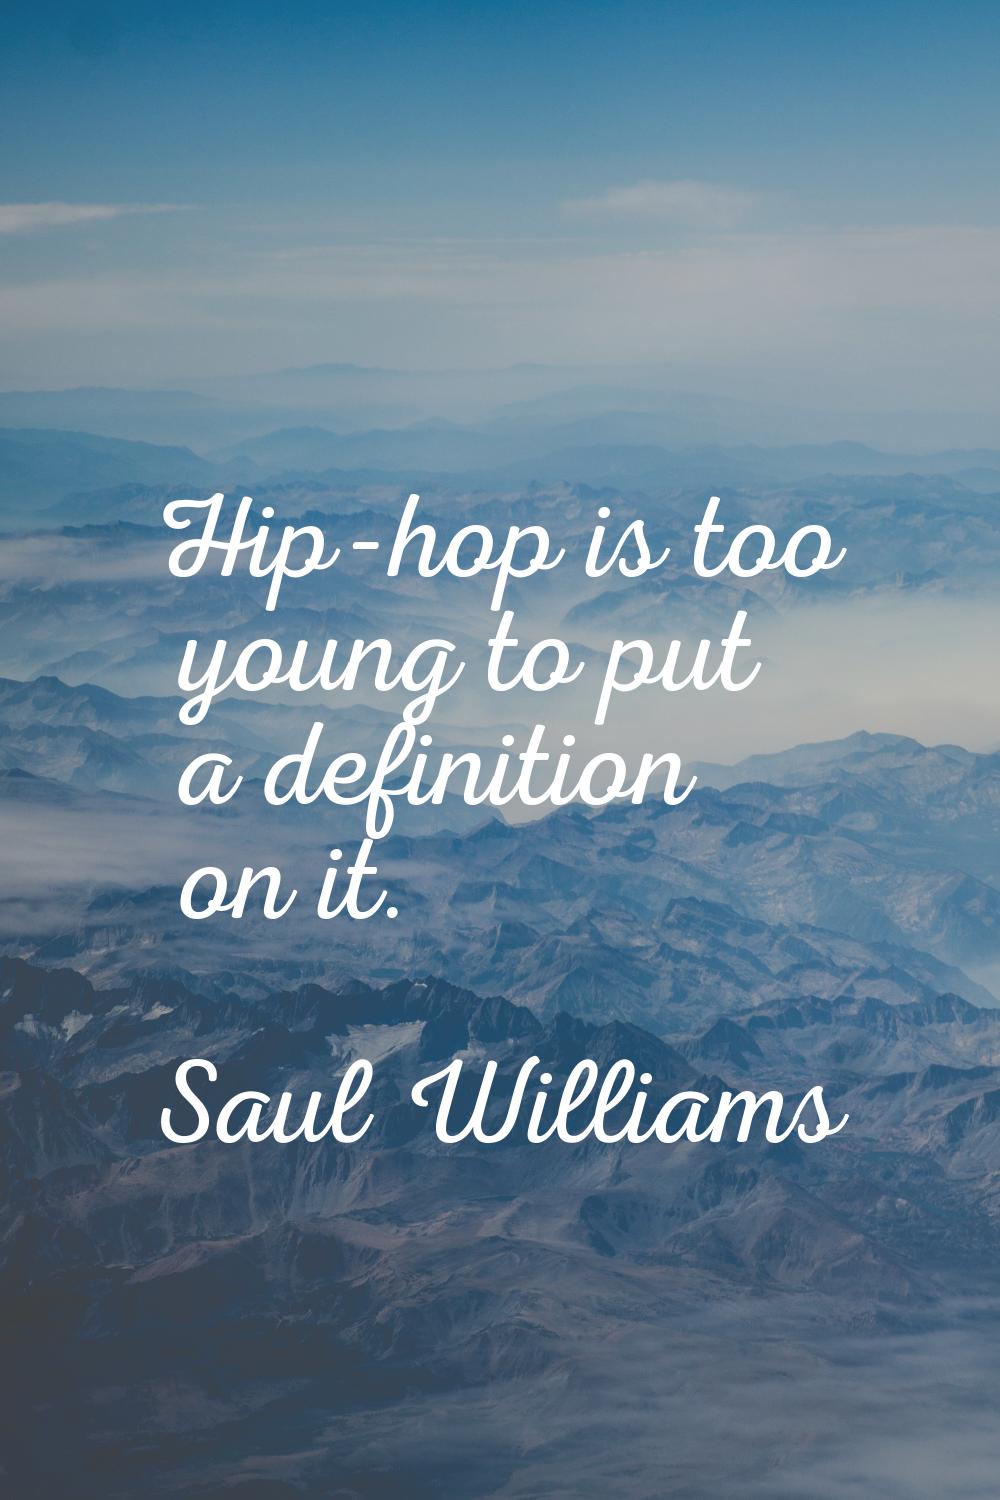 Hip-hop is too young to put a definition on it.